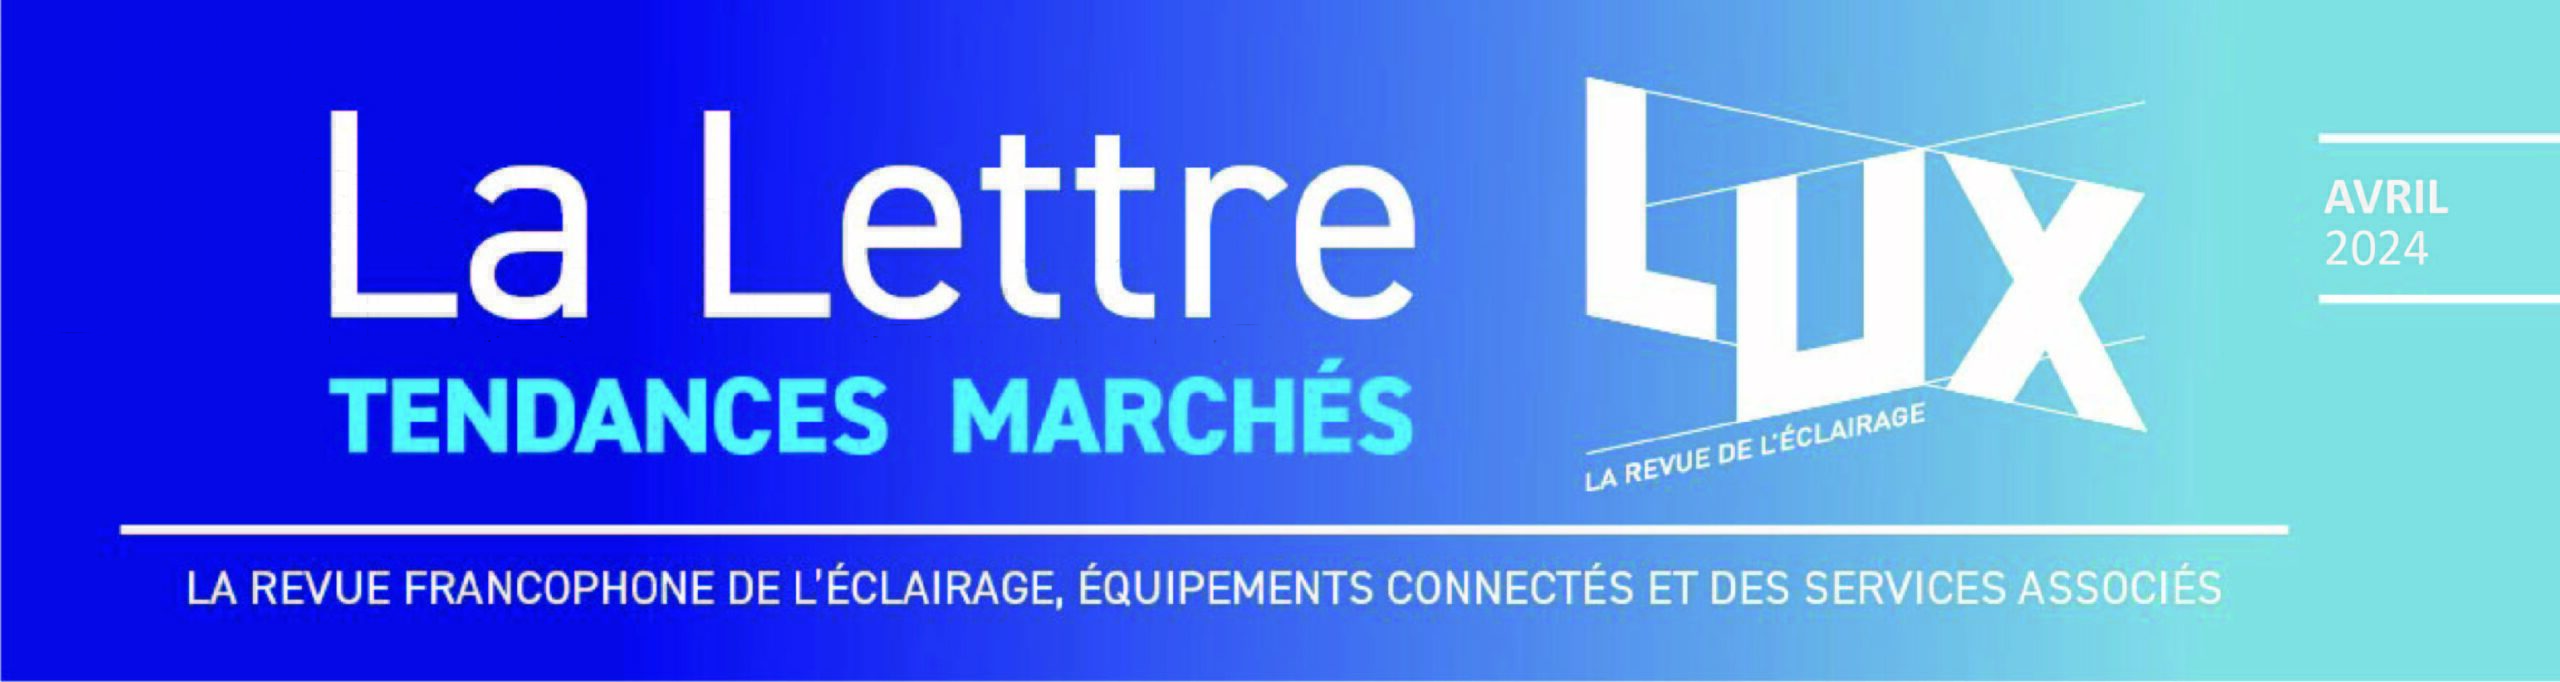 newsletter_LUX_MARCHES_4-min